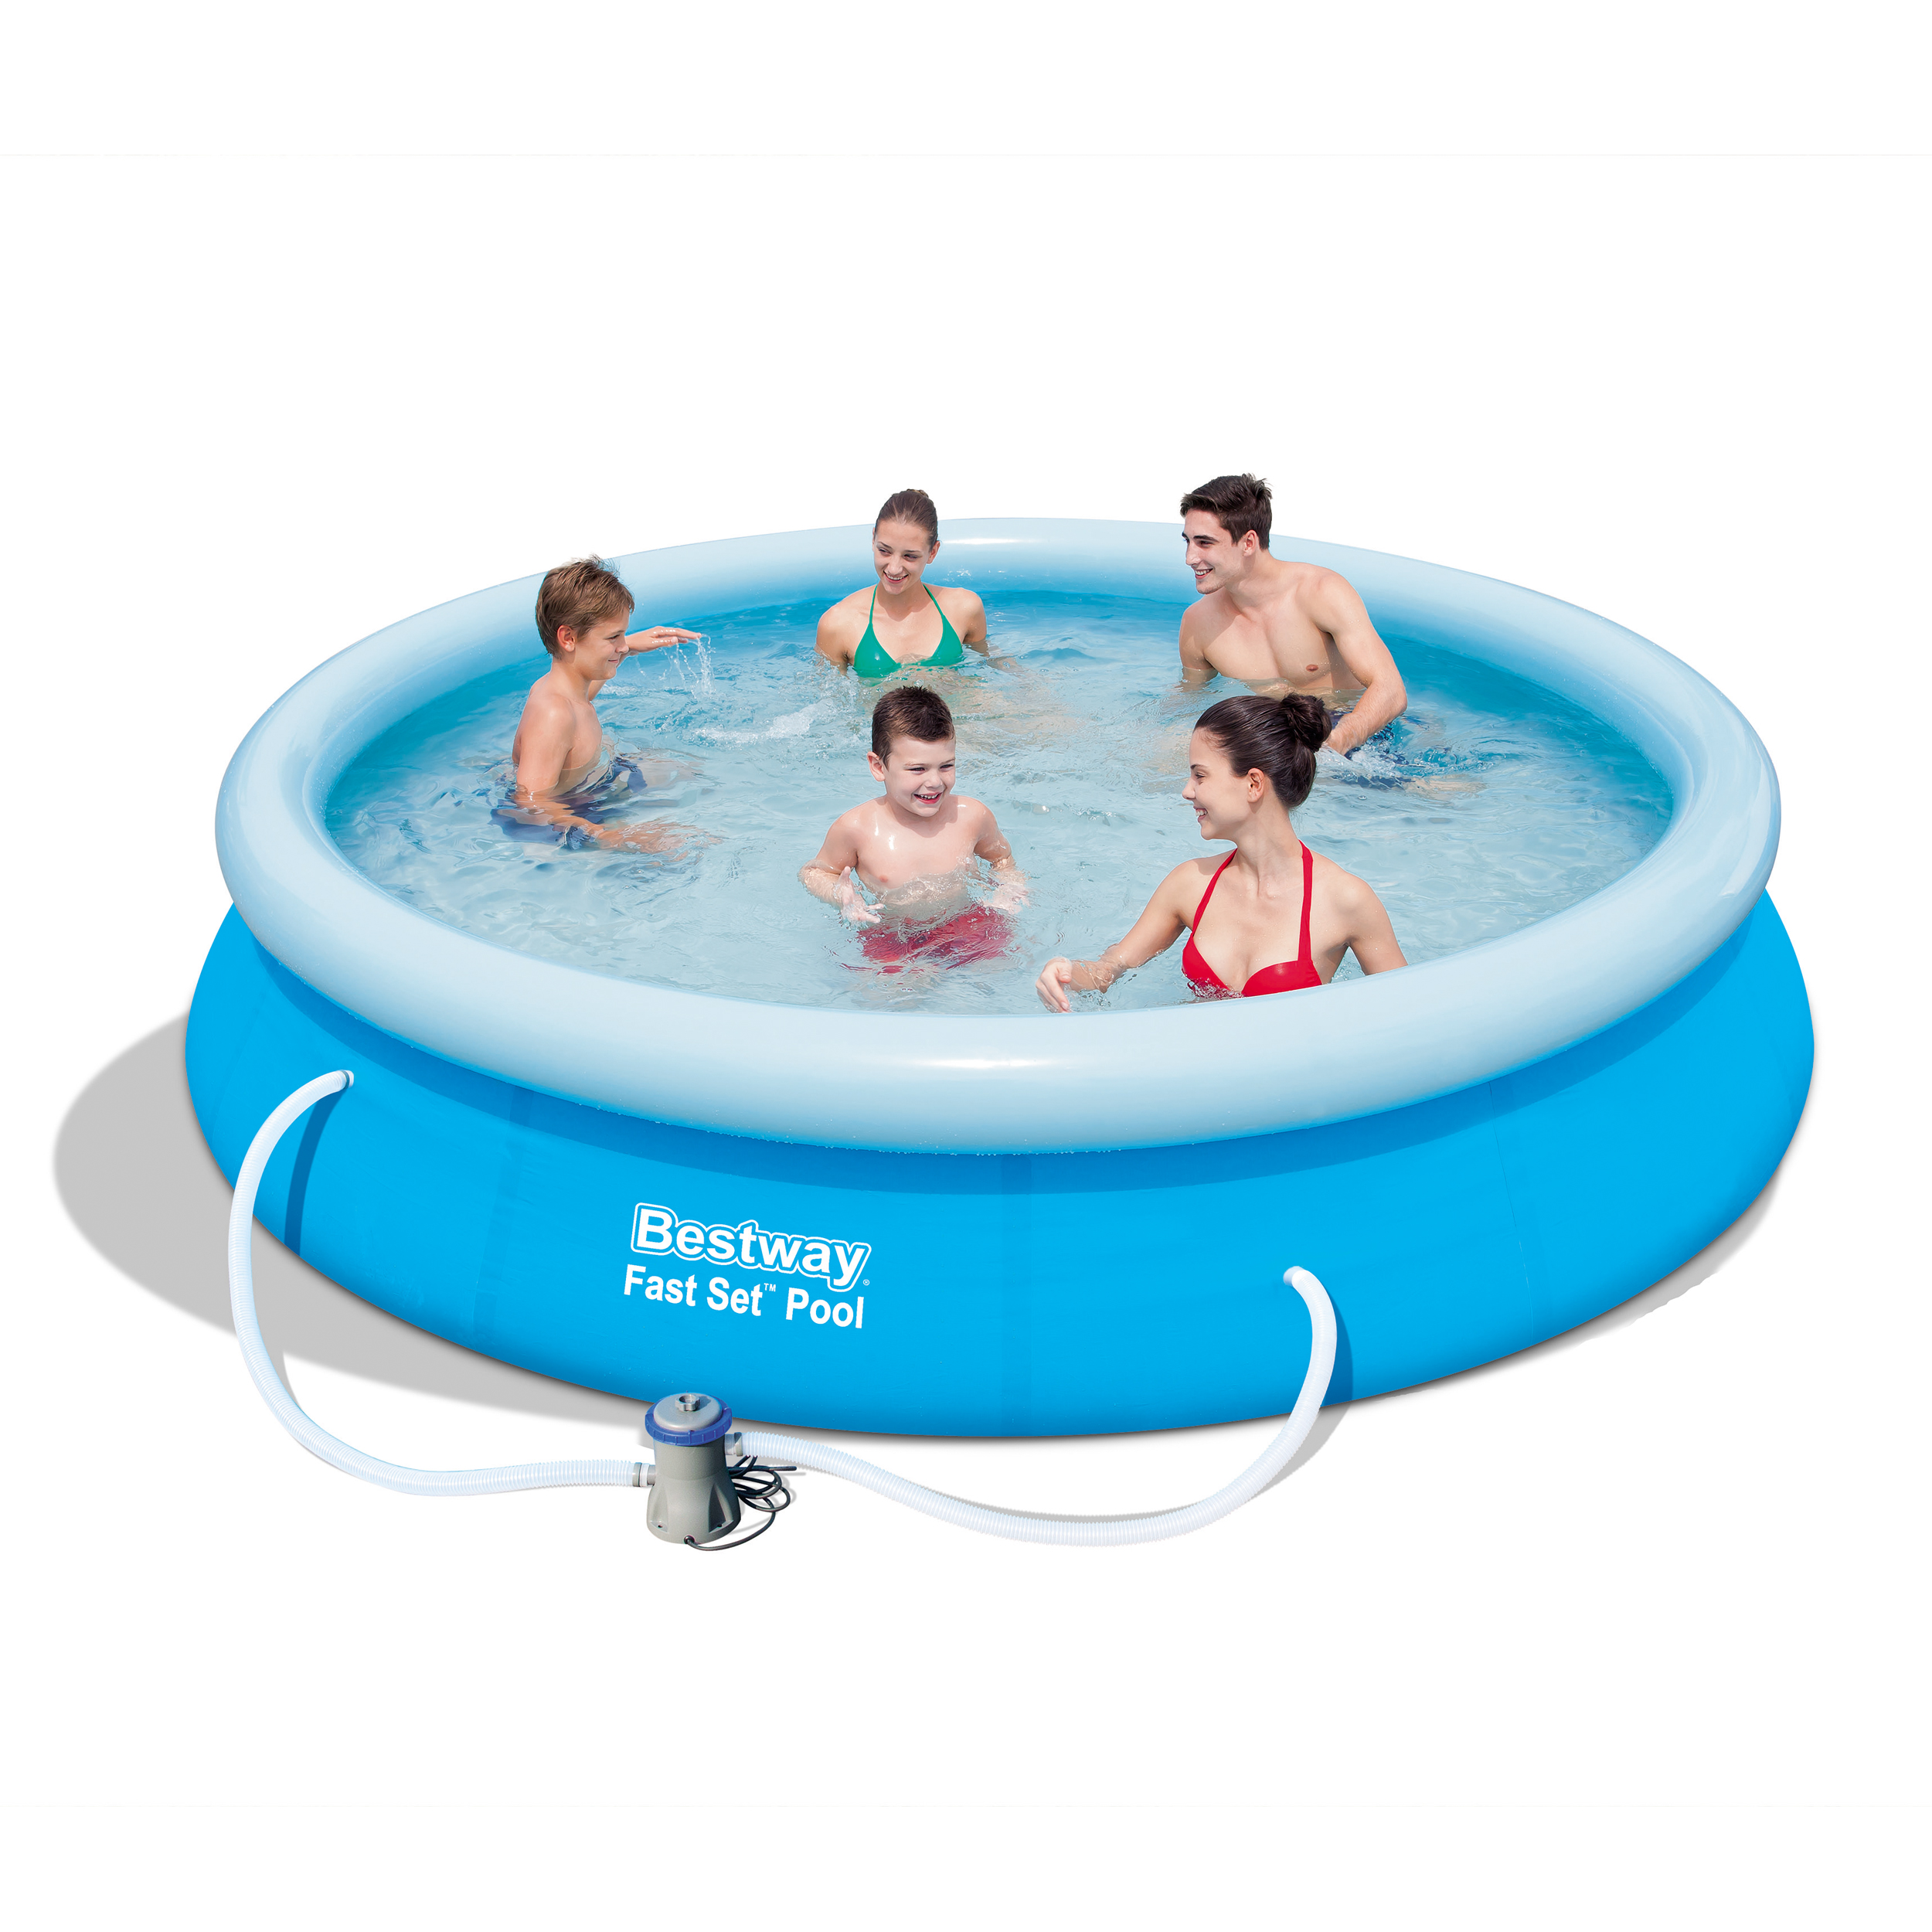 Bestway 12' x 30" Fast Set Pool with Filter Pump | Shop Your Way